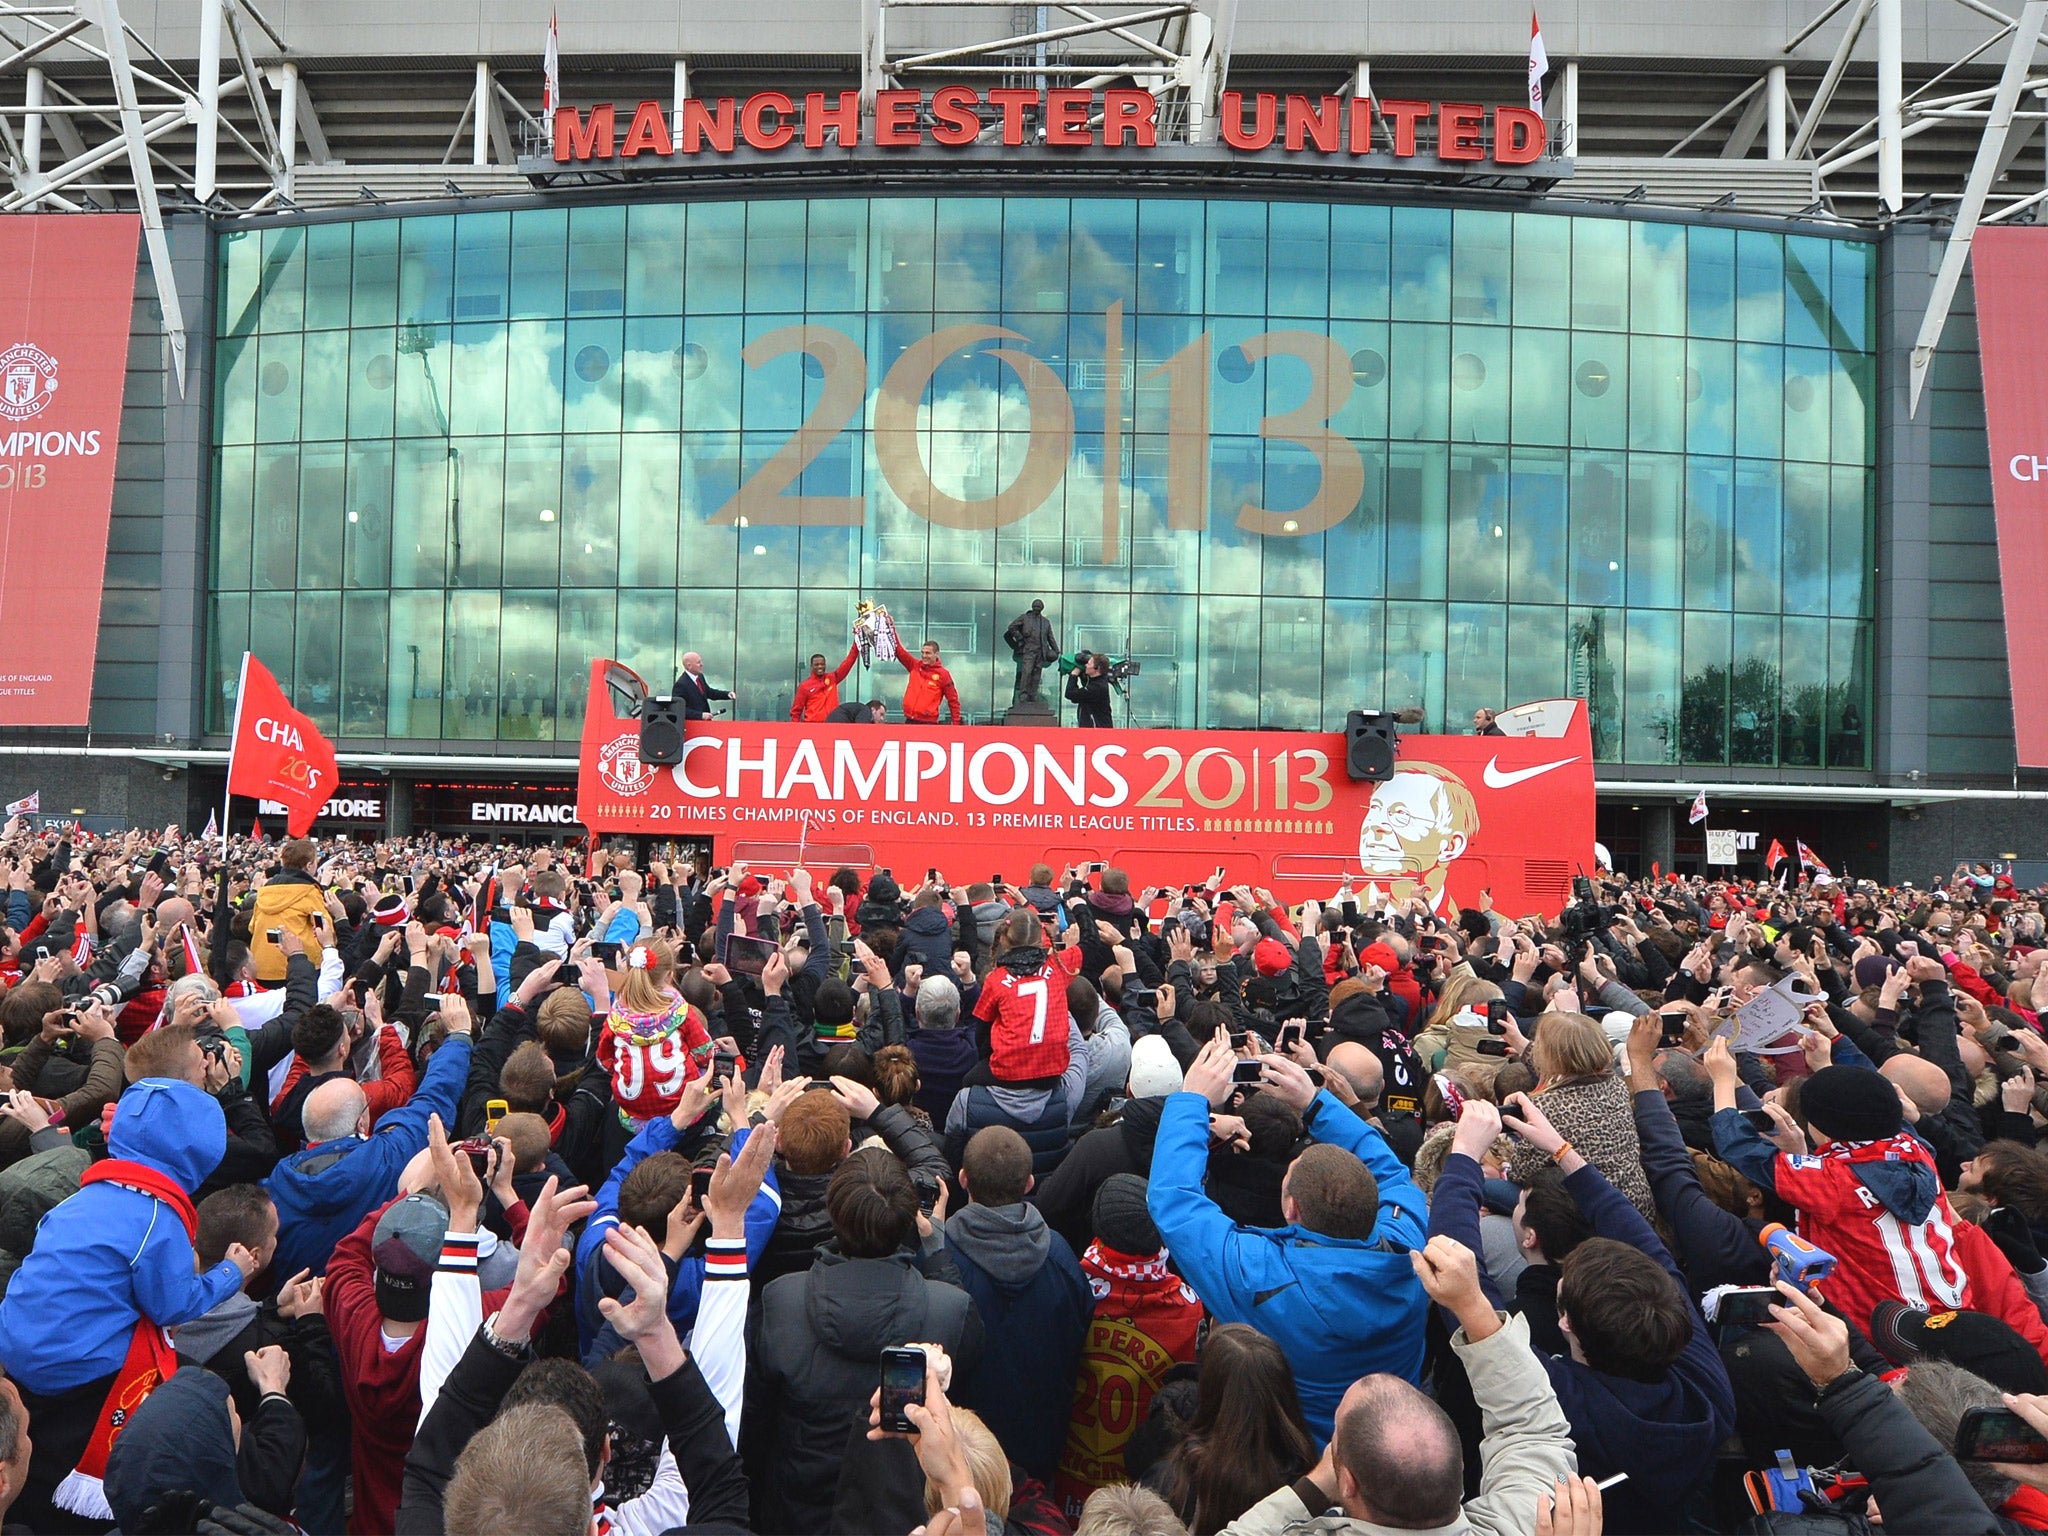 Patrice Evra and Nemanja Vidic lift the trophy outside Old Trafford